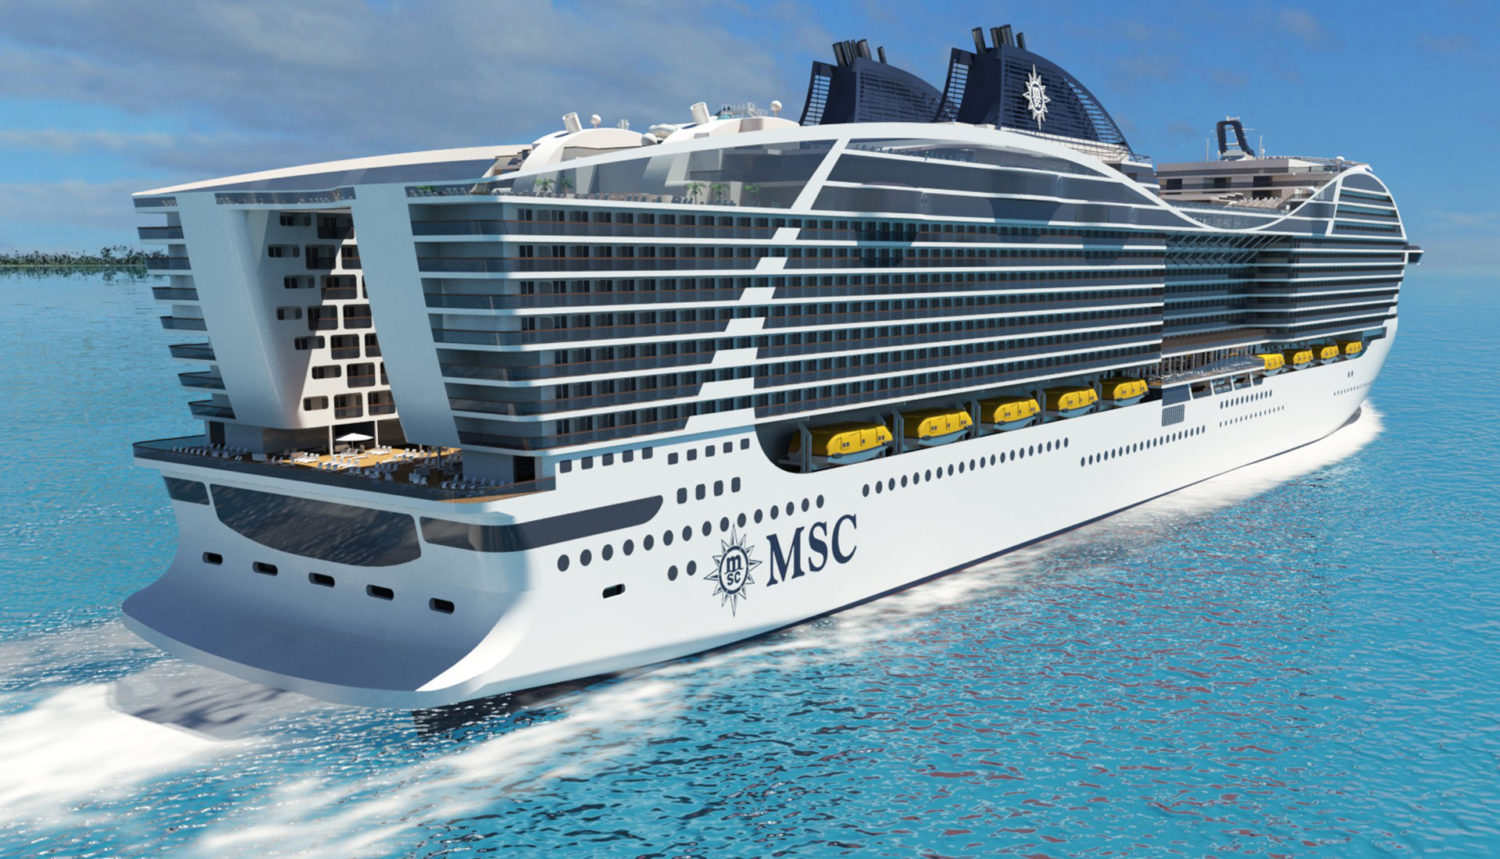 Sneak Peek at the World Class Cruise Ships from MSC Cruises